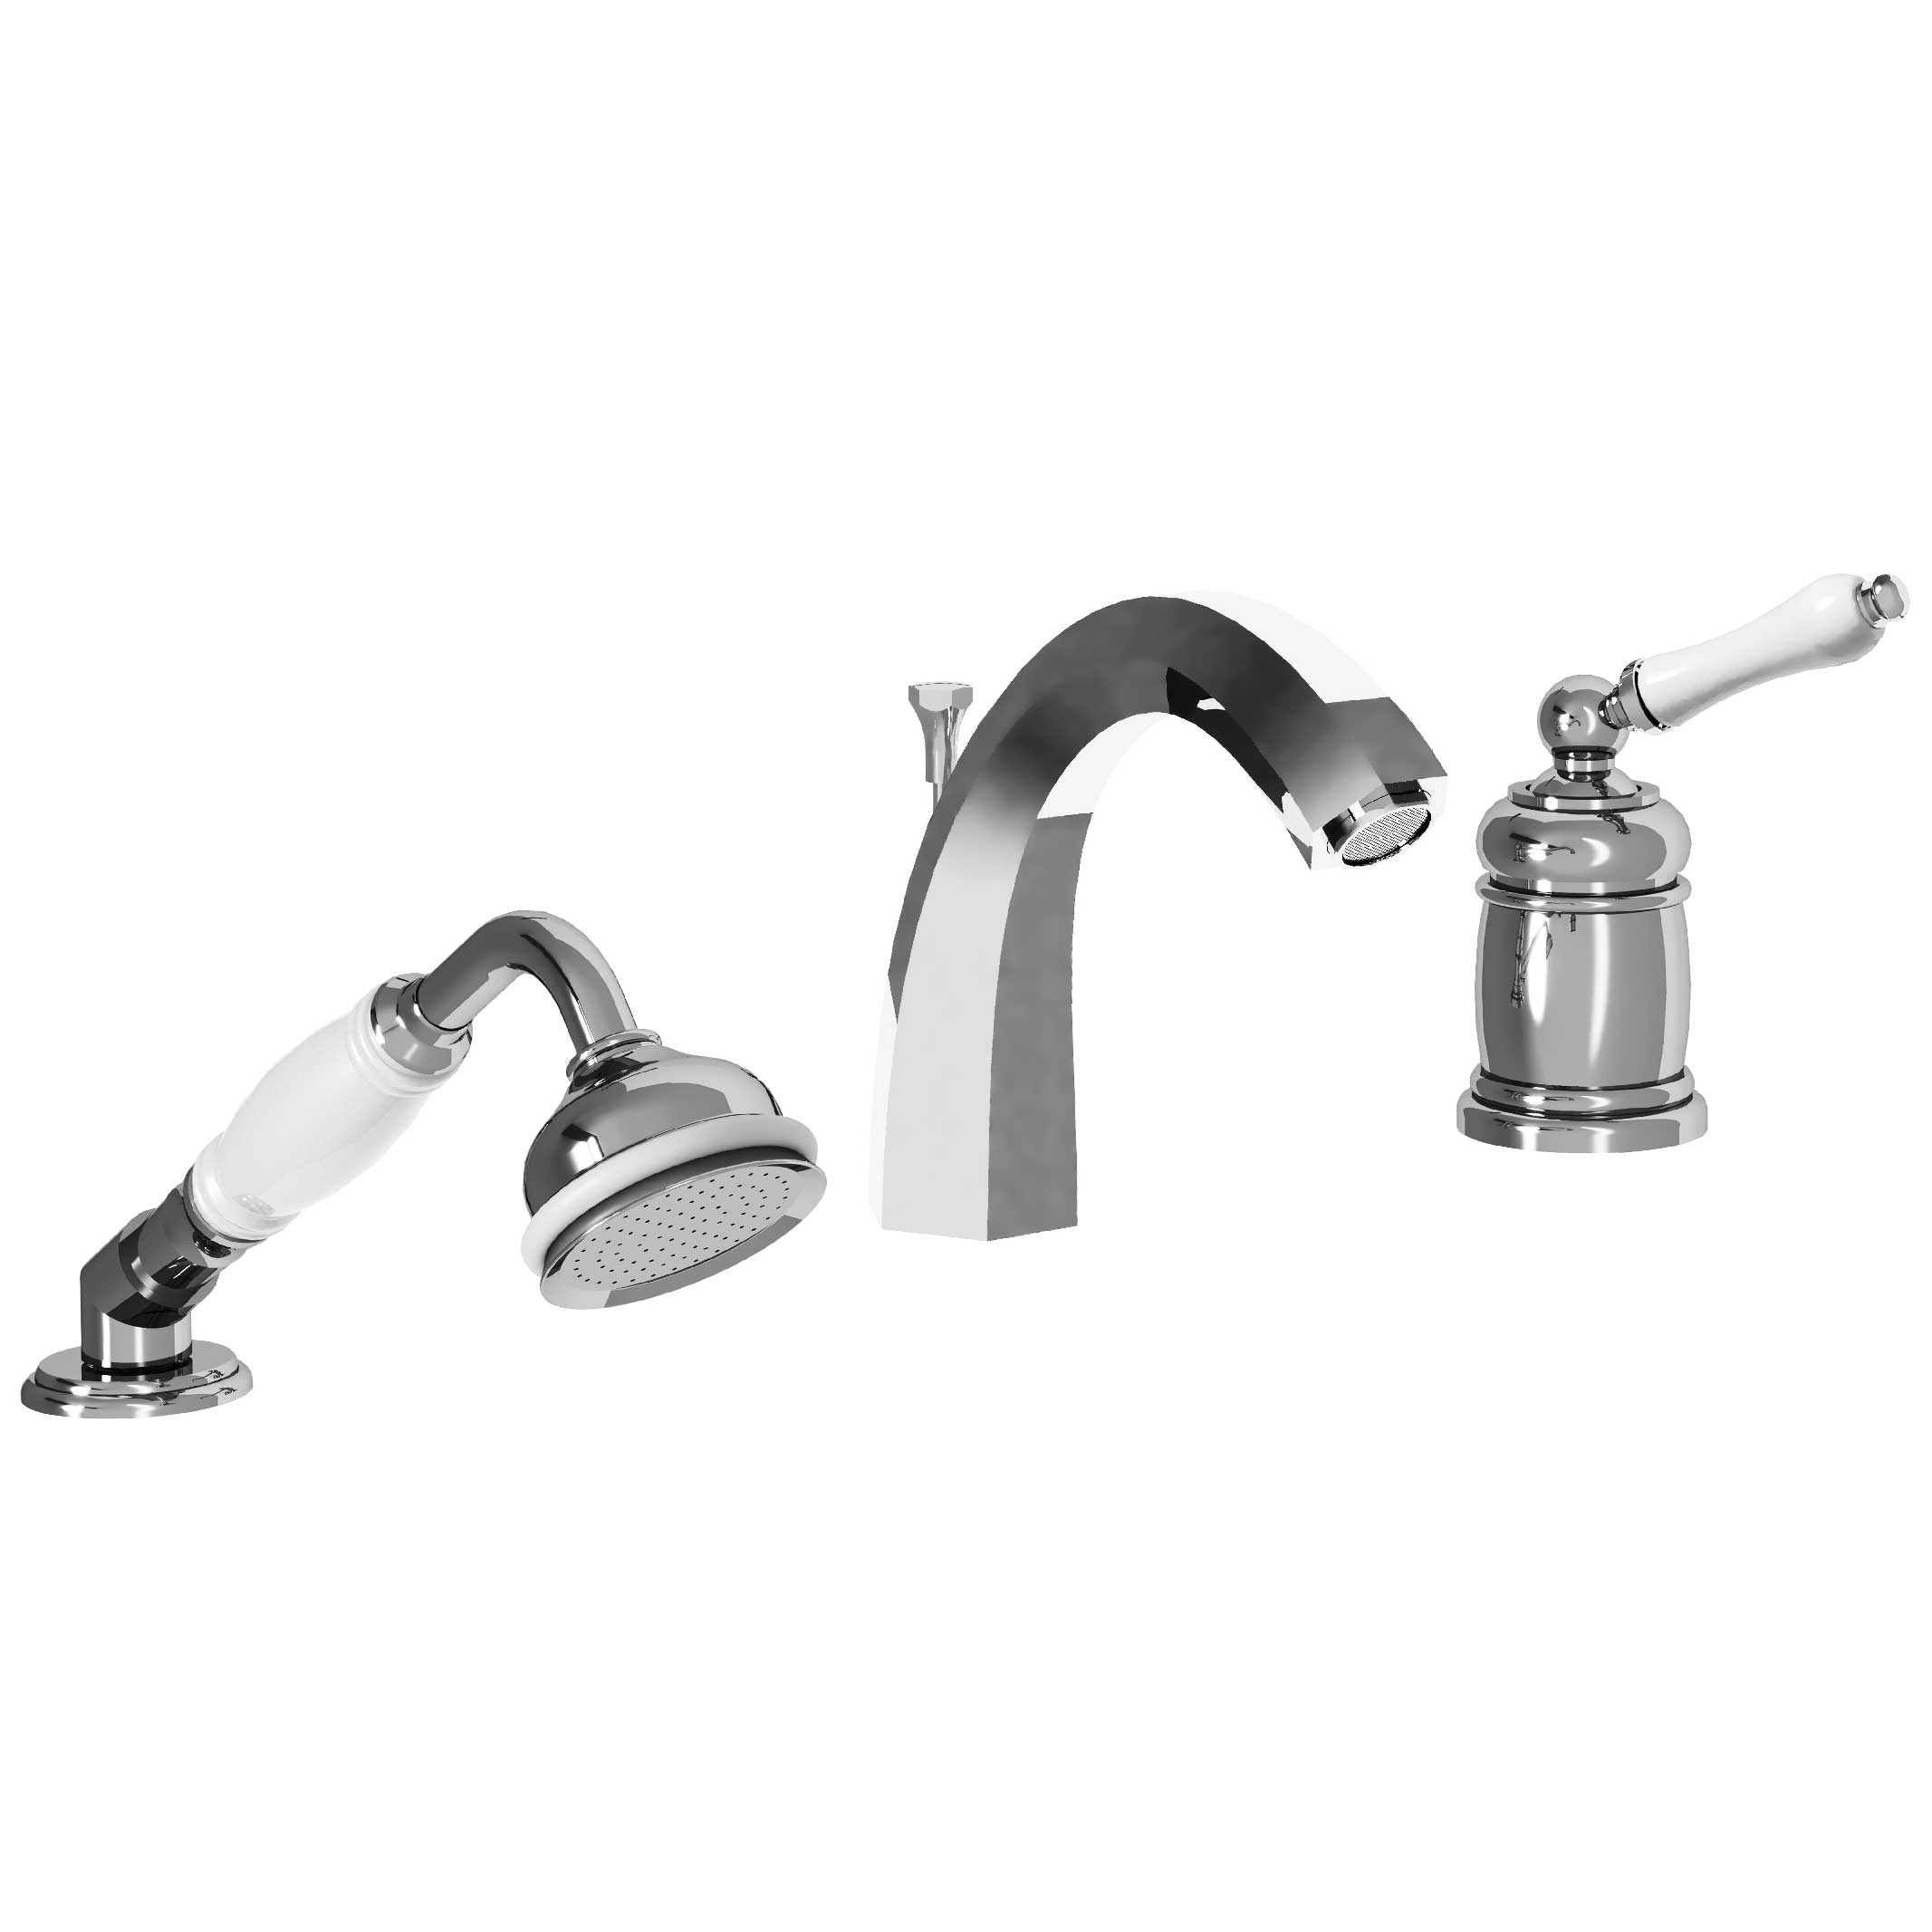 M32-3301MH 3-hole single-lever bath and shower mixer, high spout